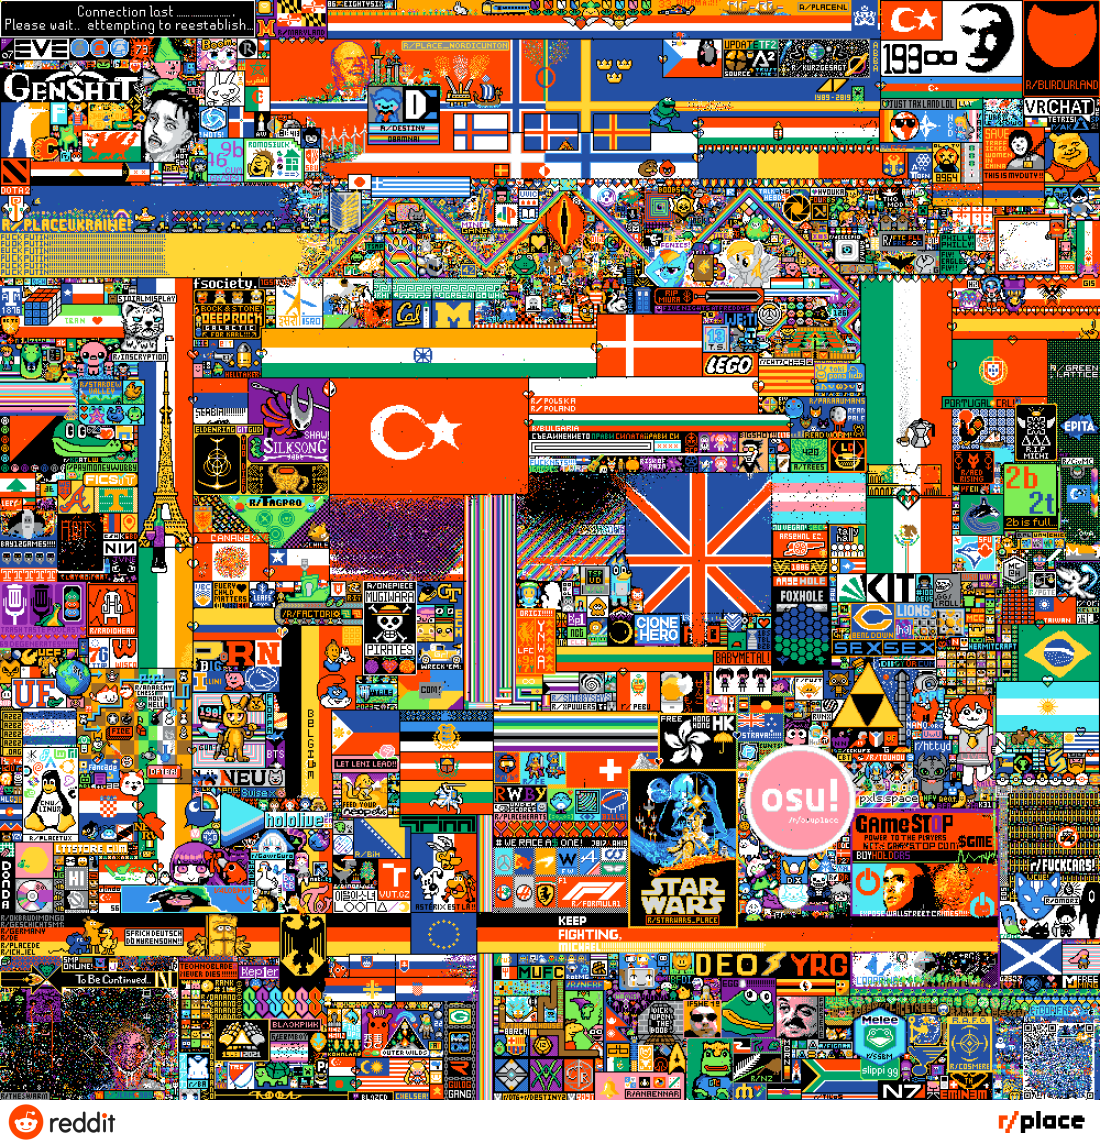 The /r/place canvas as it appeared on 2nd of April